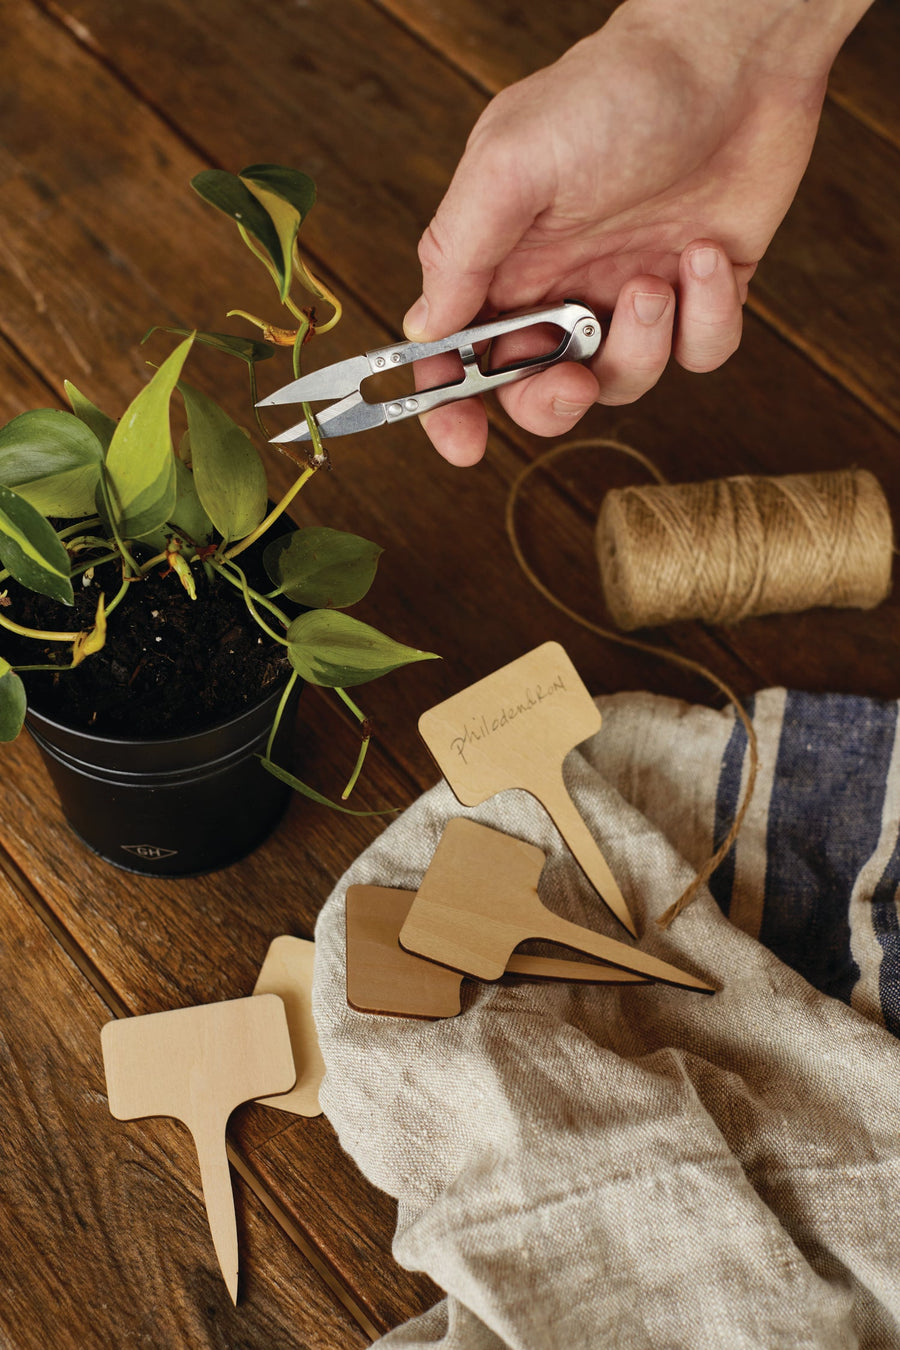 Gardener using mini shears to trim plant in a pot with garden stakes and twine on a table